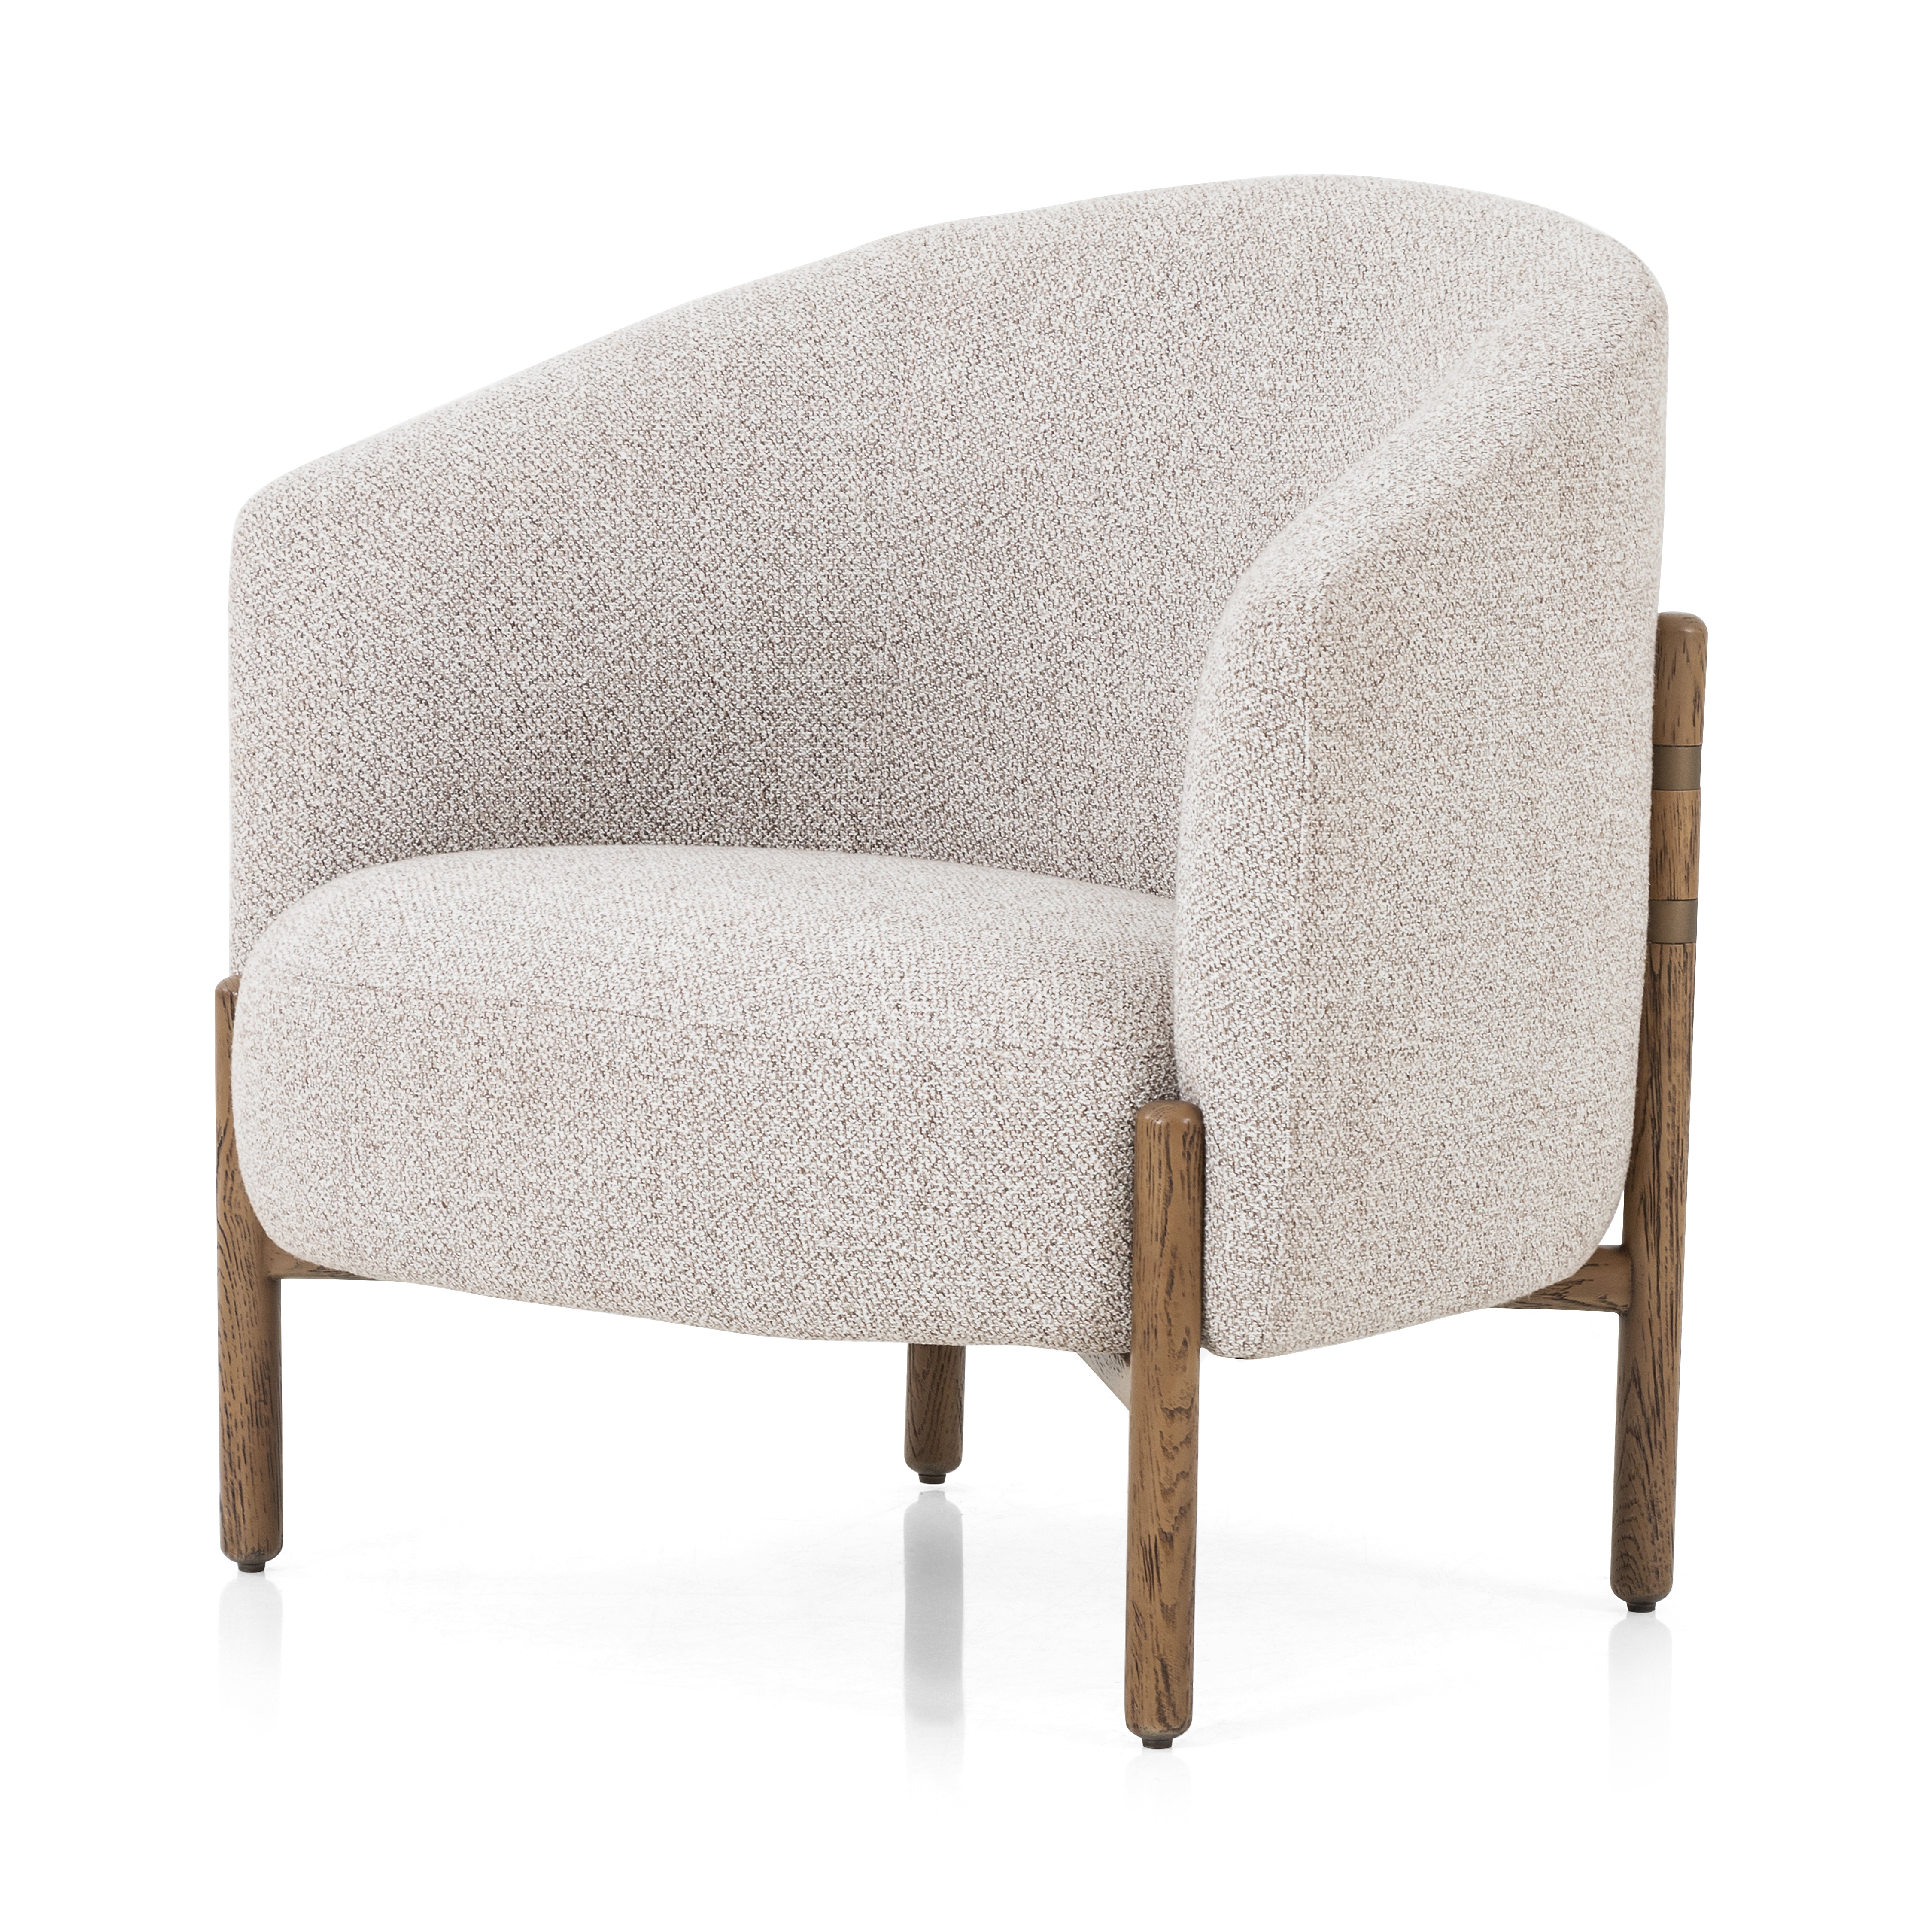 Enfield Chair-Astor Stone - Image 0